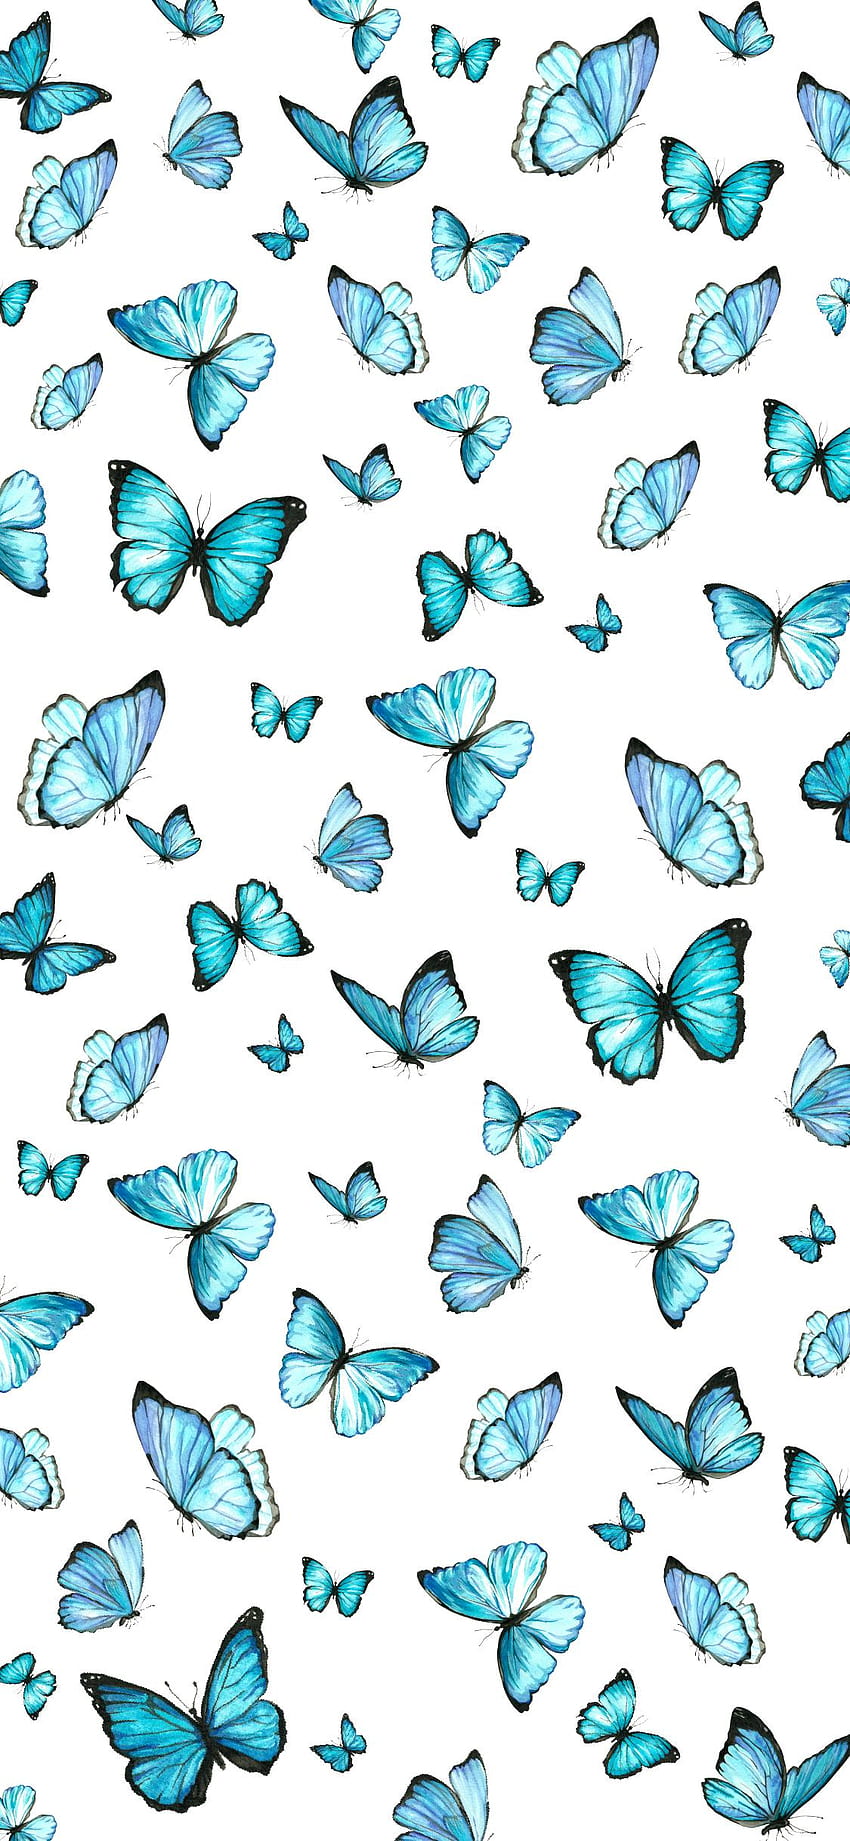 Blue Butterfly Wallpapers  HD Wallpapers  ID 25054